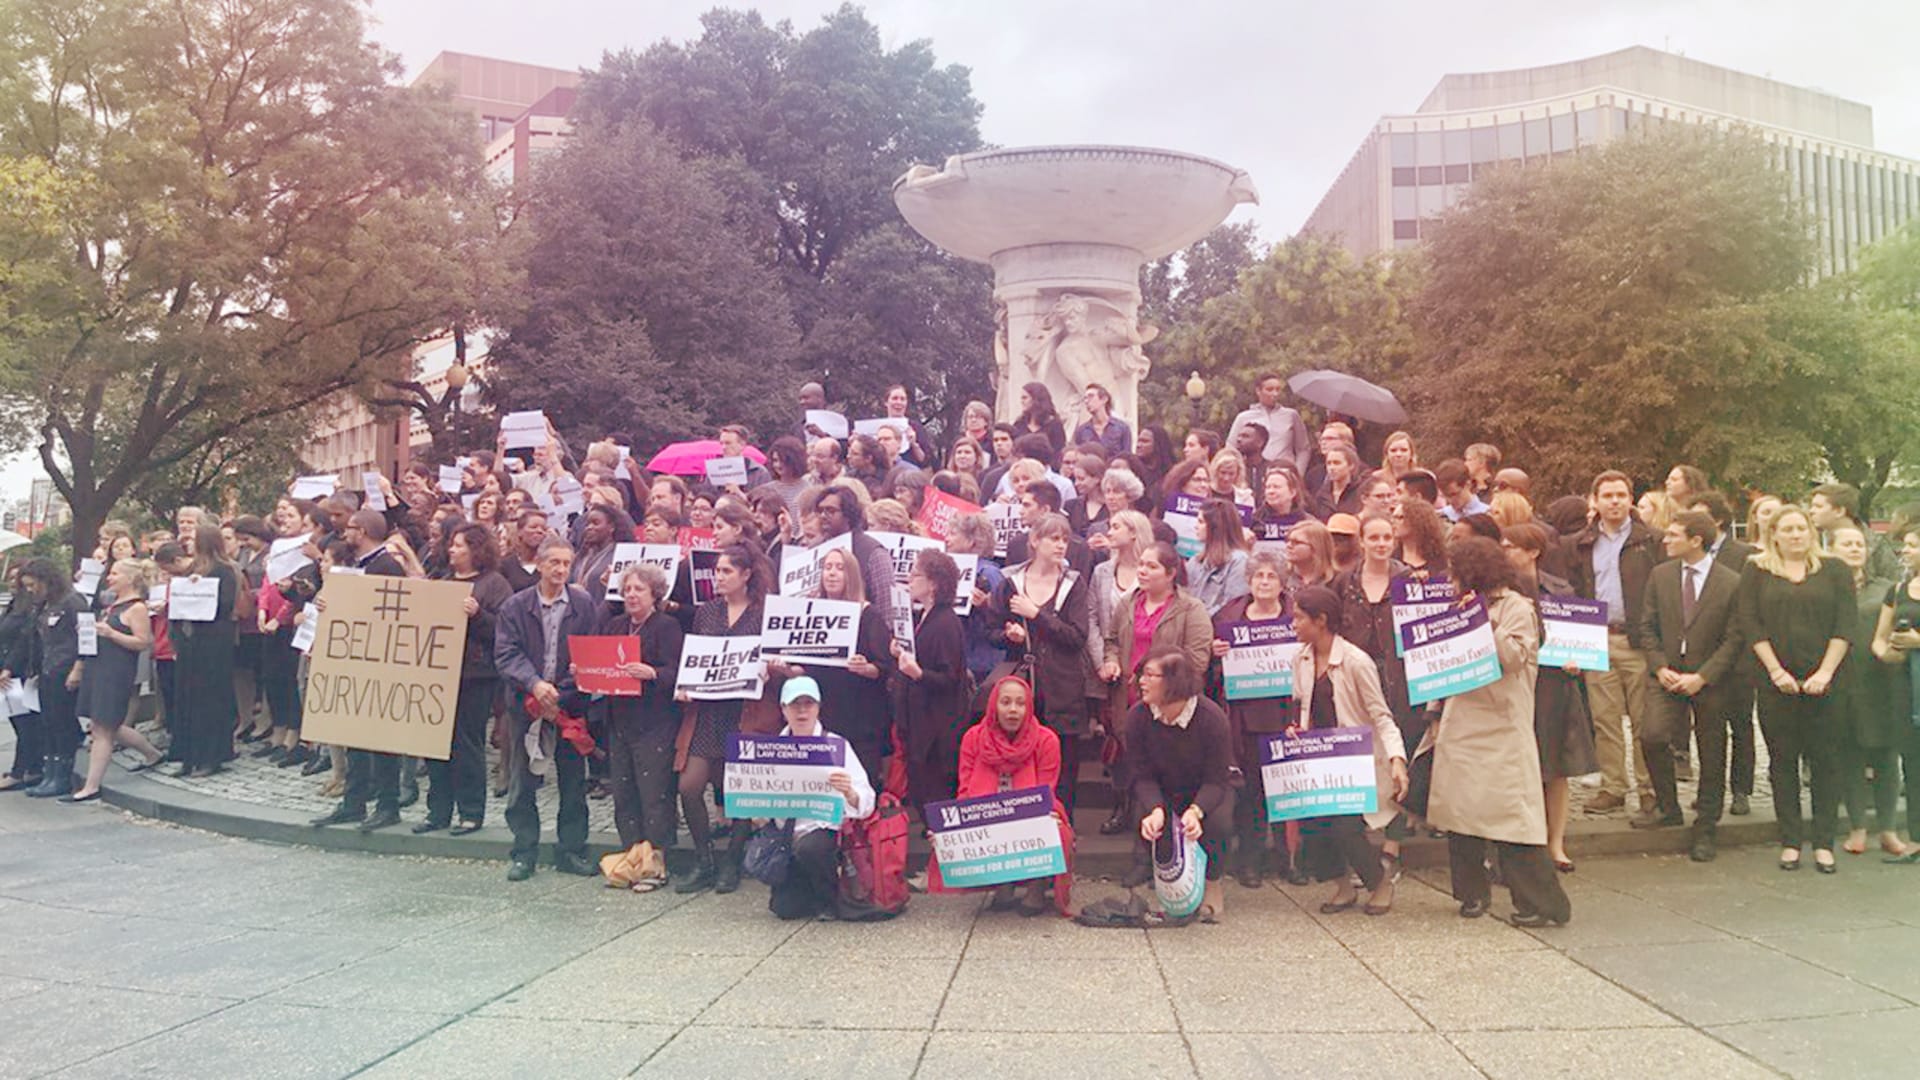 People are taking to the streets to show they “Believe Survivors”